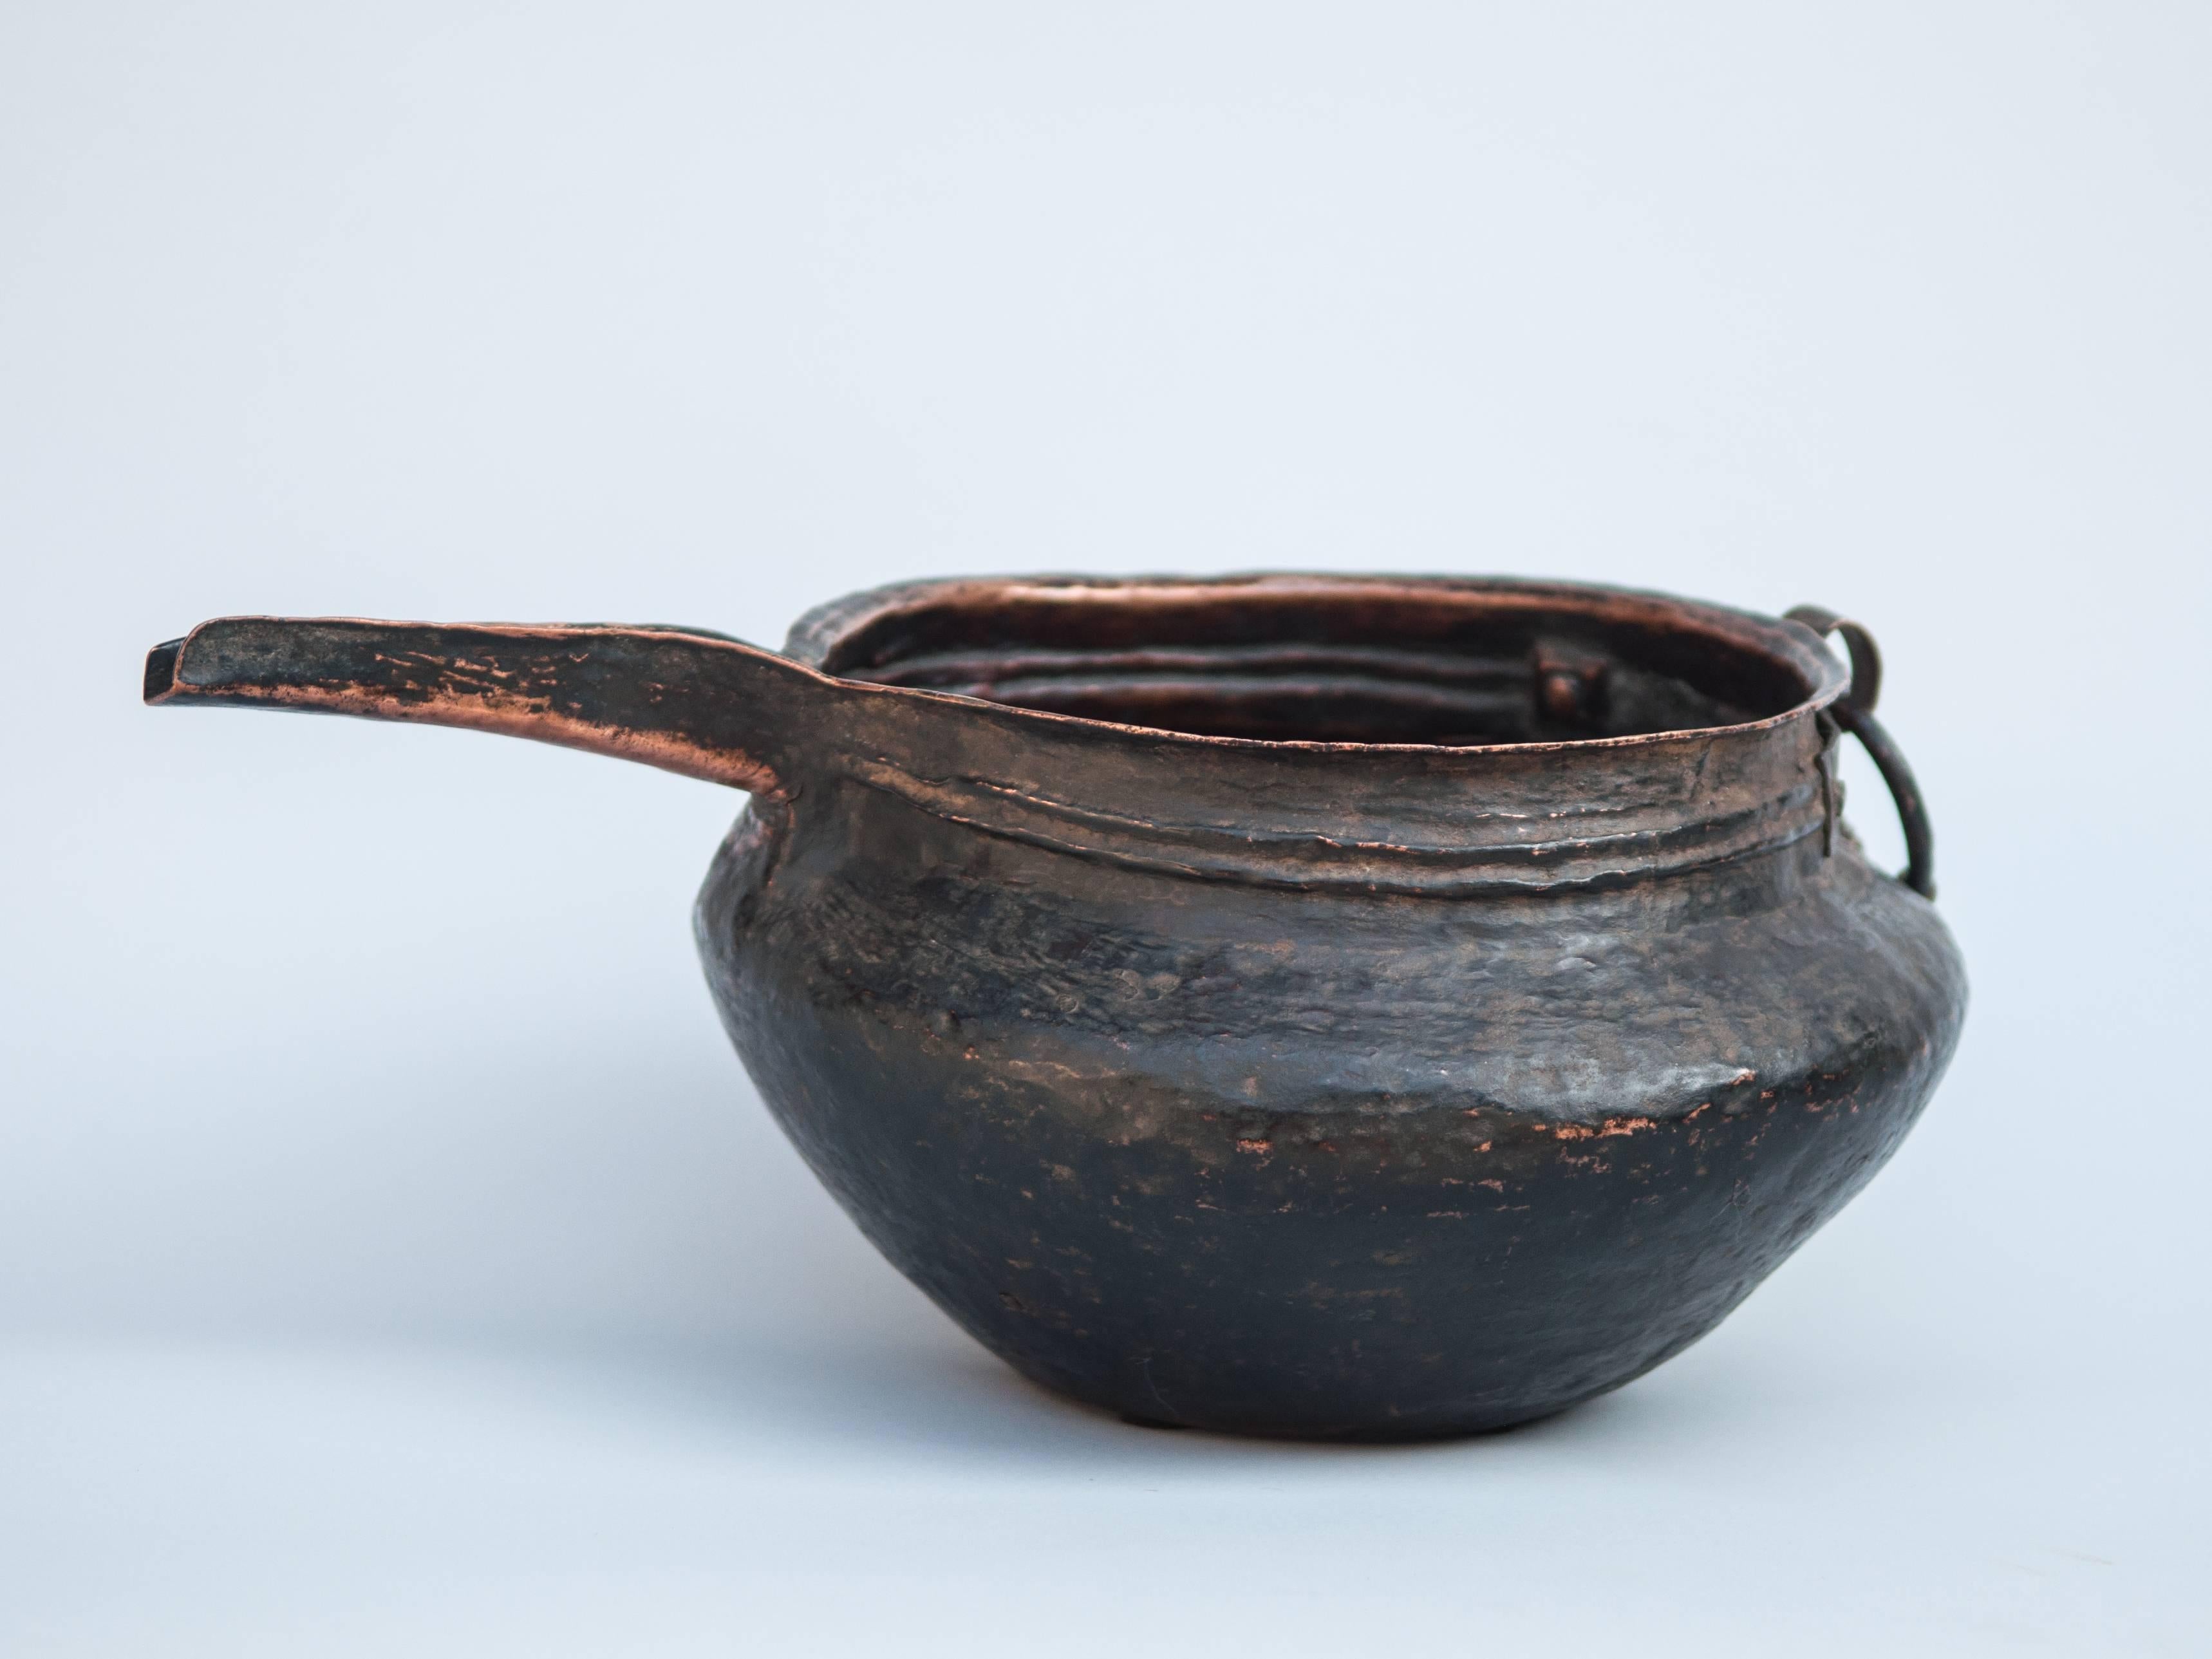 Copper pot with spout. Hand-hammered. Tibet. Mid-20th century.
This pot was used in making Chang, the fermented alcoholic drink so popular with the Tibetans, and which plays such an important role in daily social interactions and in showing